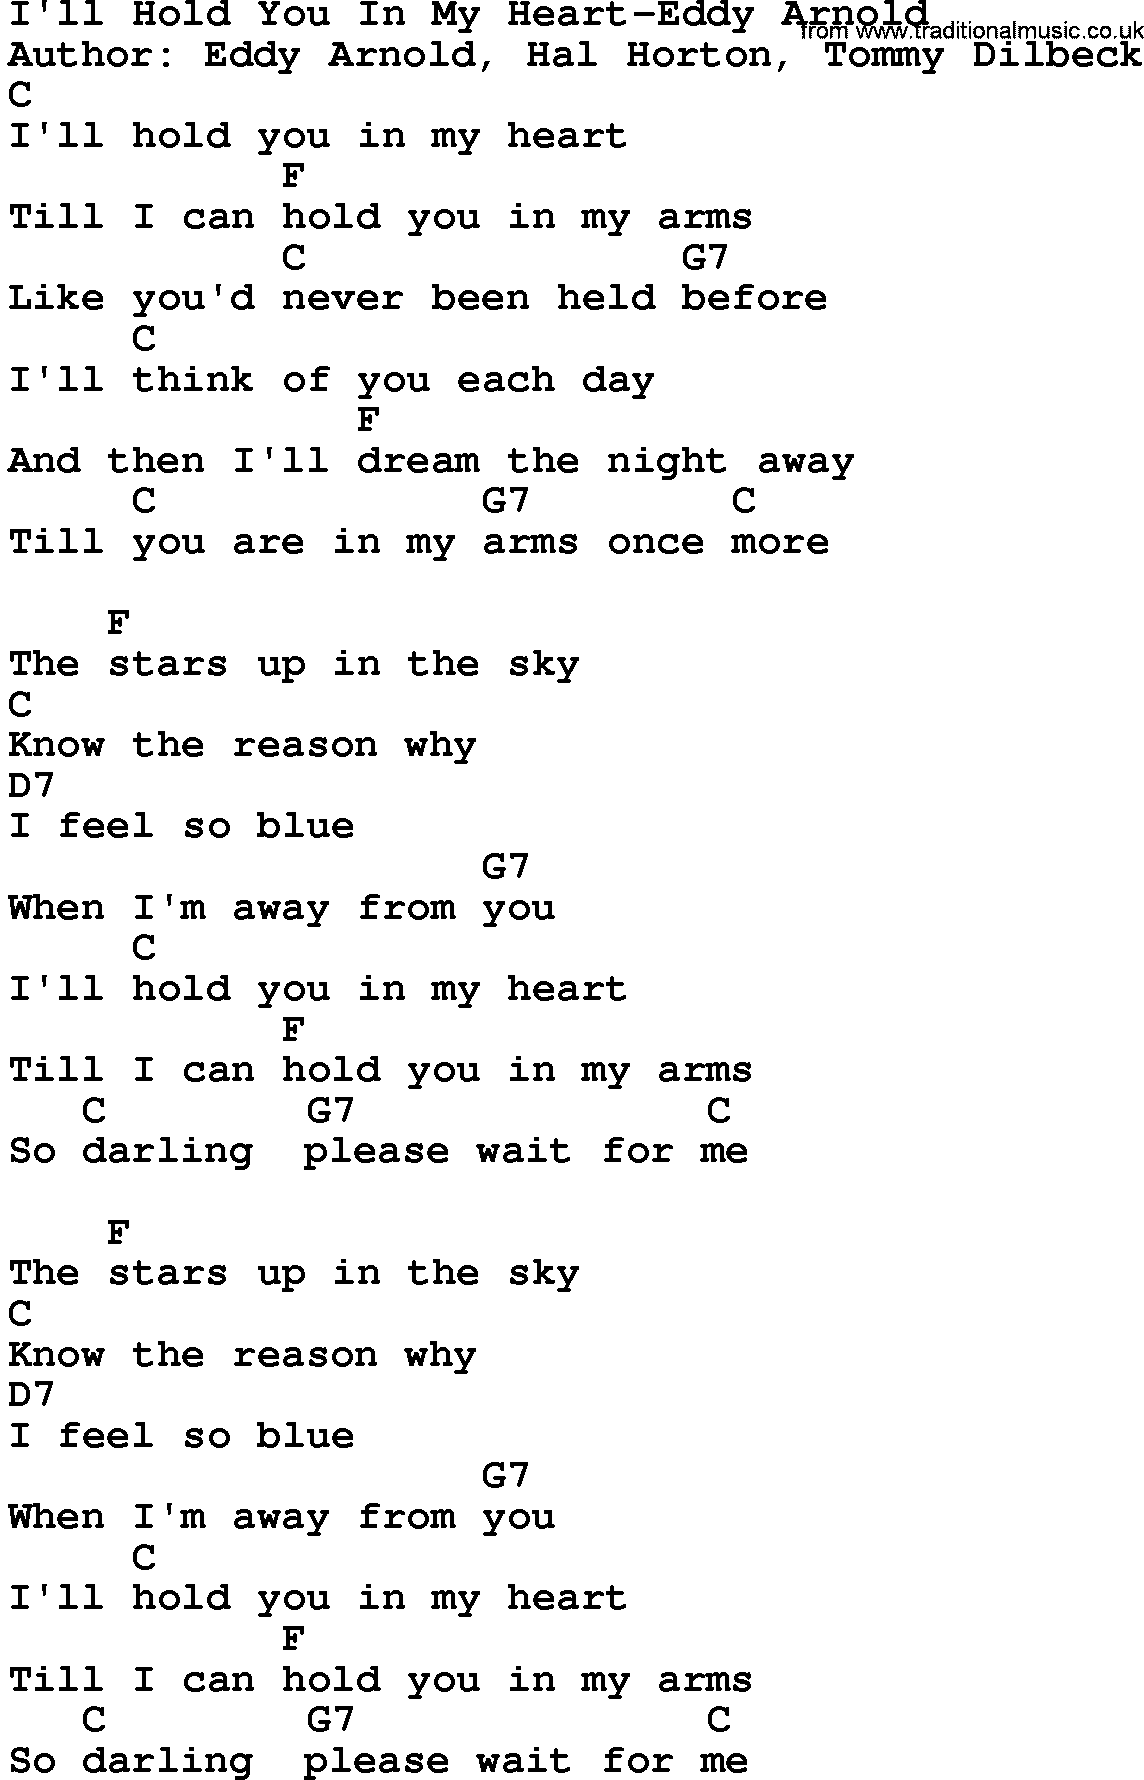 Country music song: I'll Hold You In My Heart-Eddy Arnold lyrics and chords